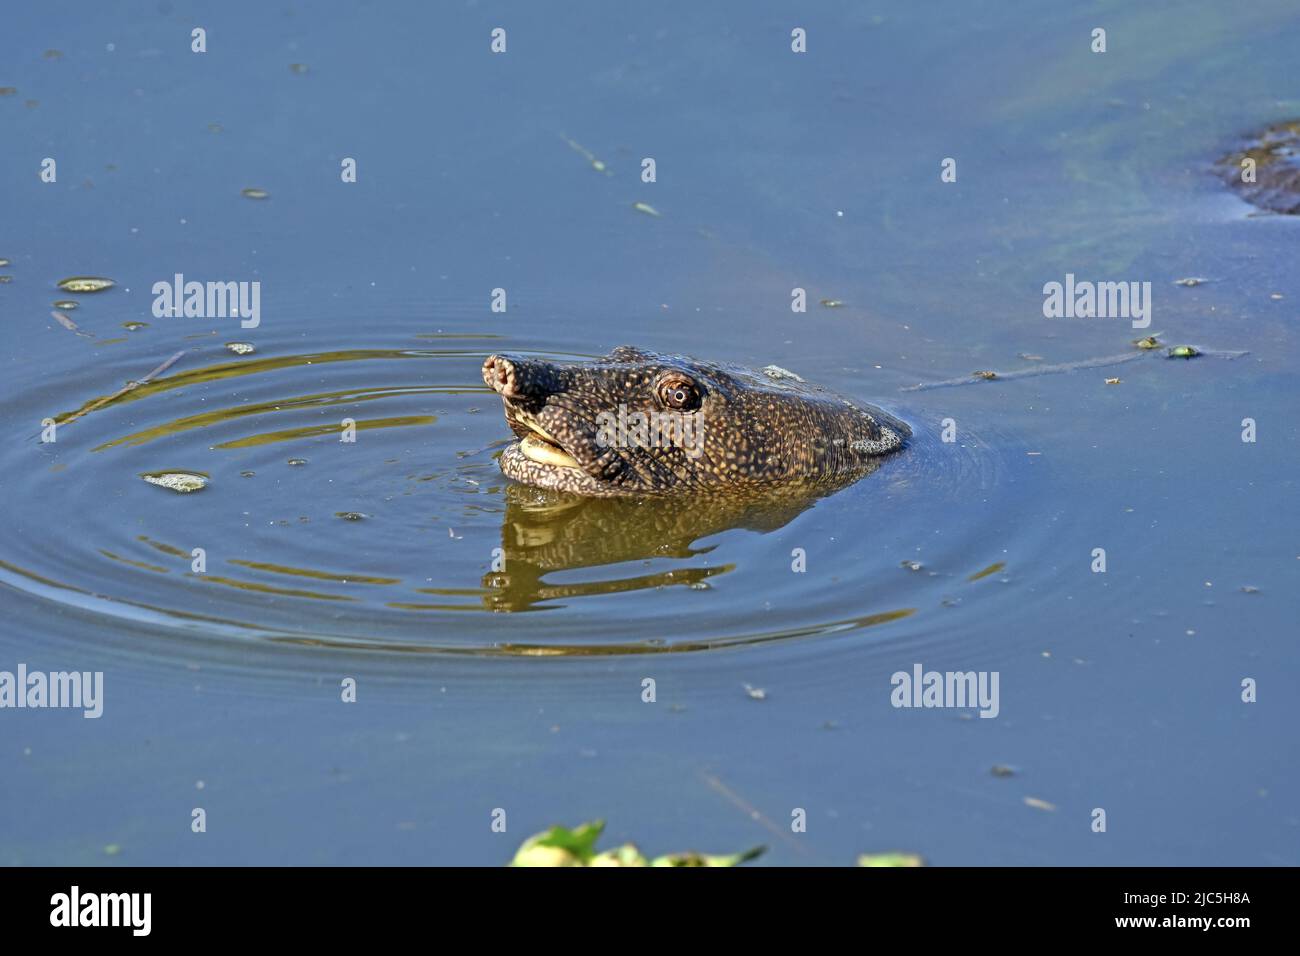 Soft shell turtle in water, Israel Stock Photo